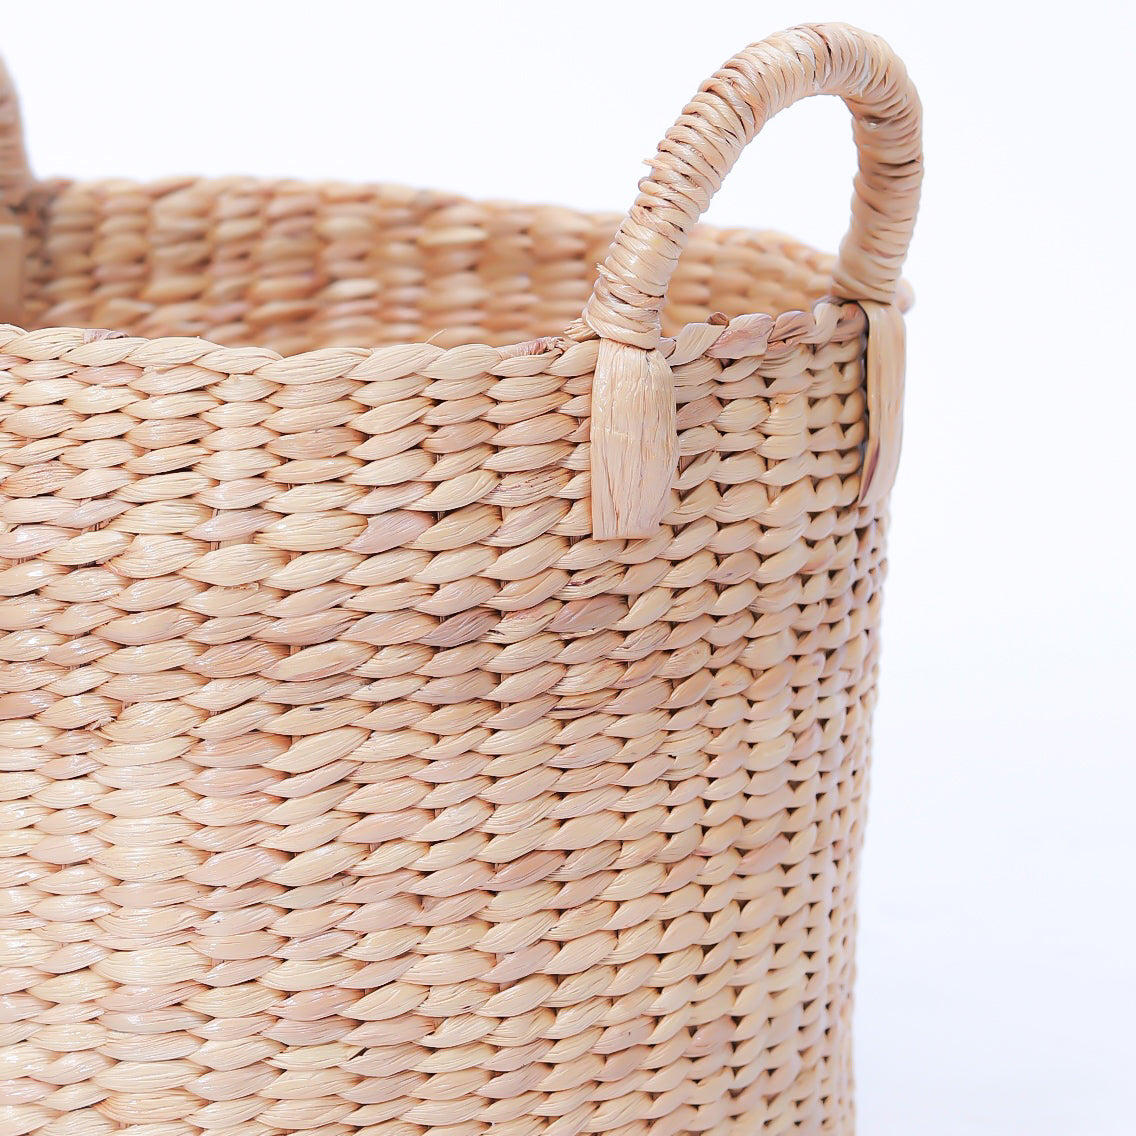 Baskets for blankets, sofa pillows